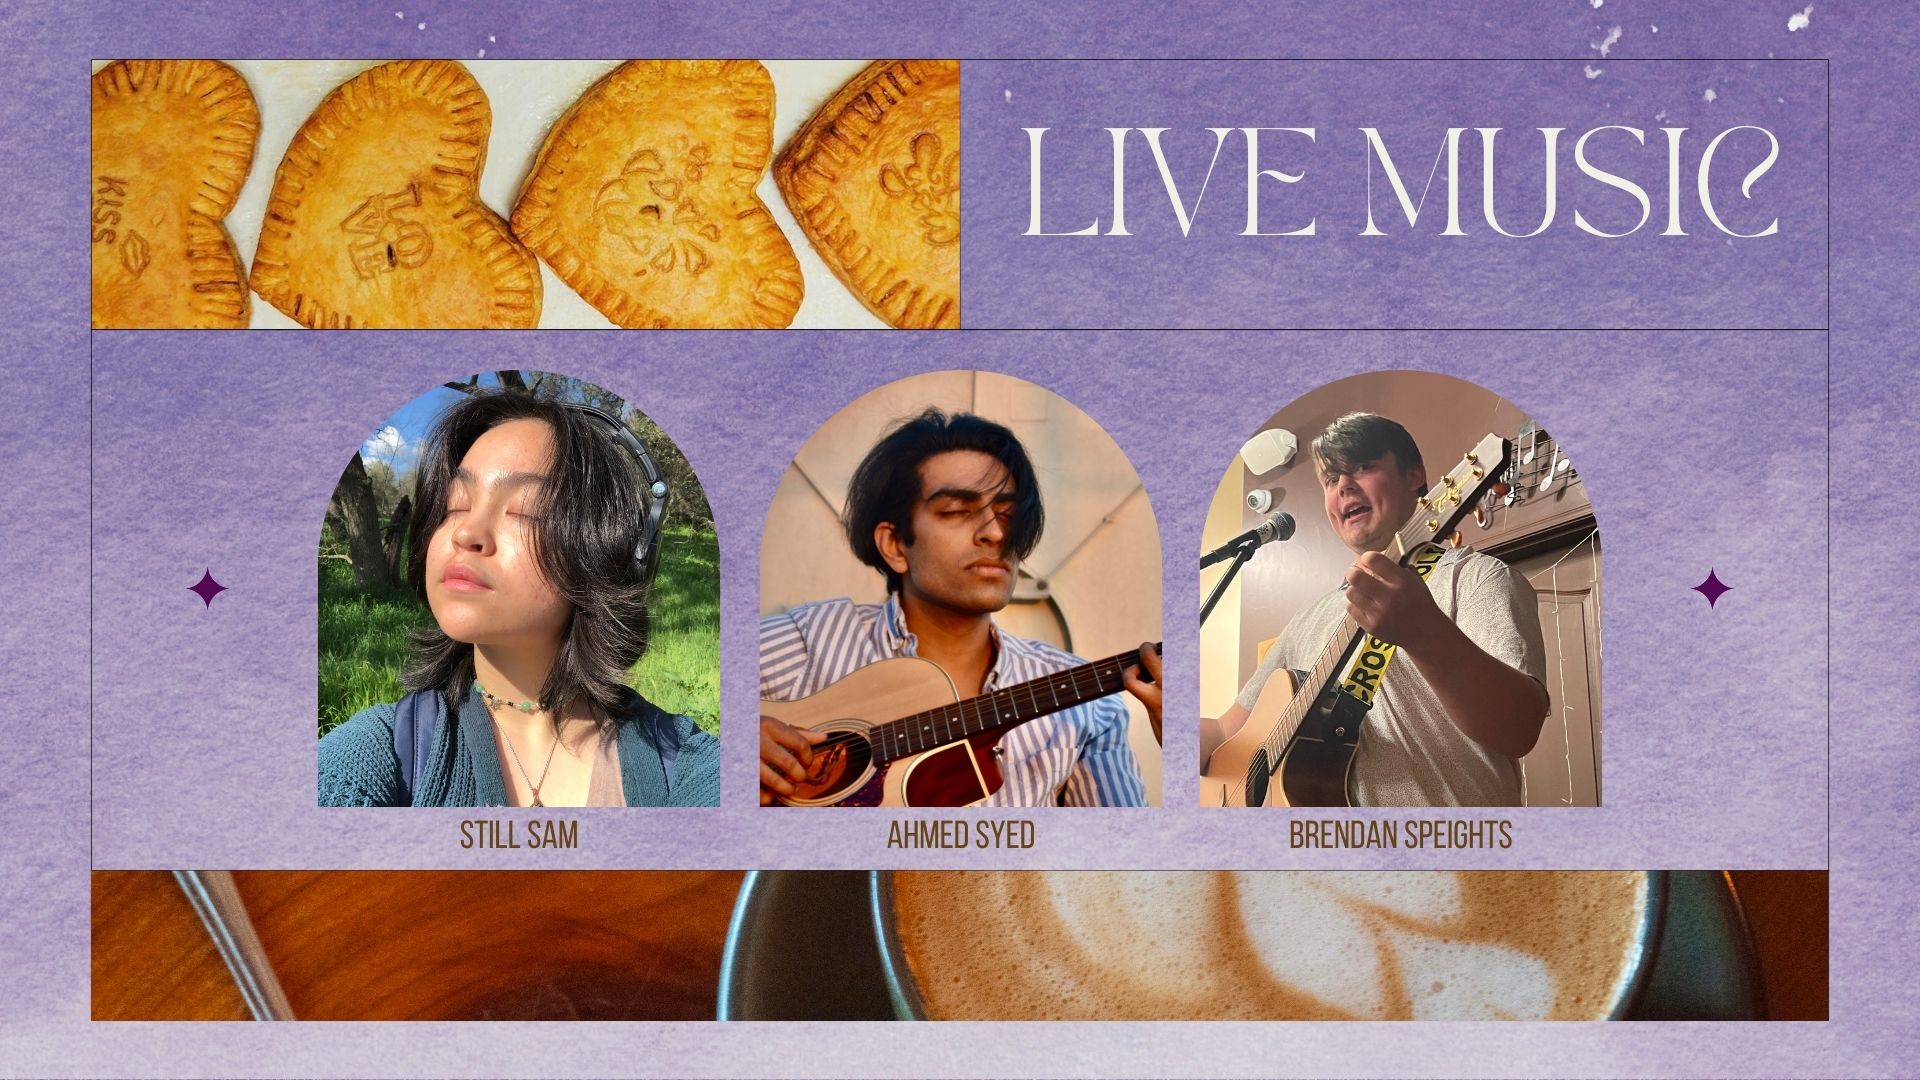 Live Music with Still Sam, Ahmed Syed, & Brendan Speights